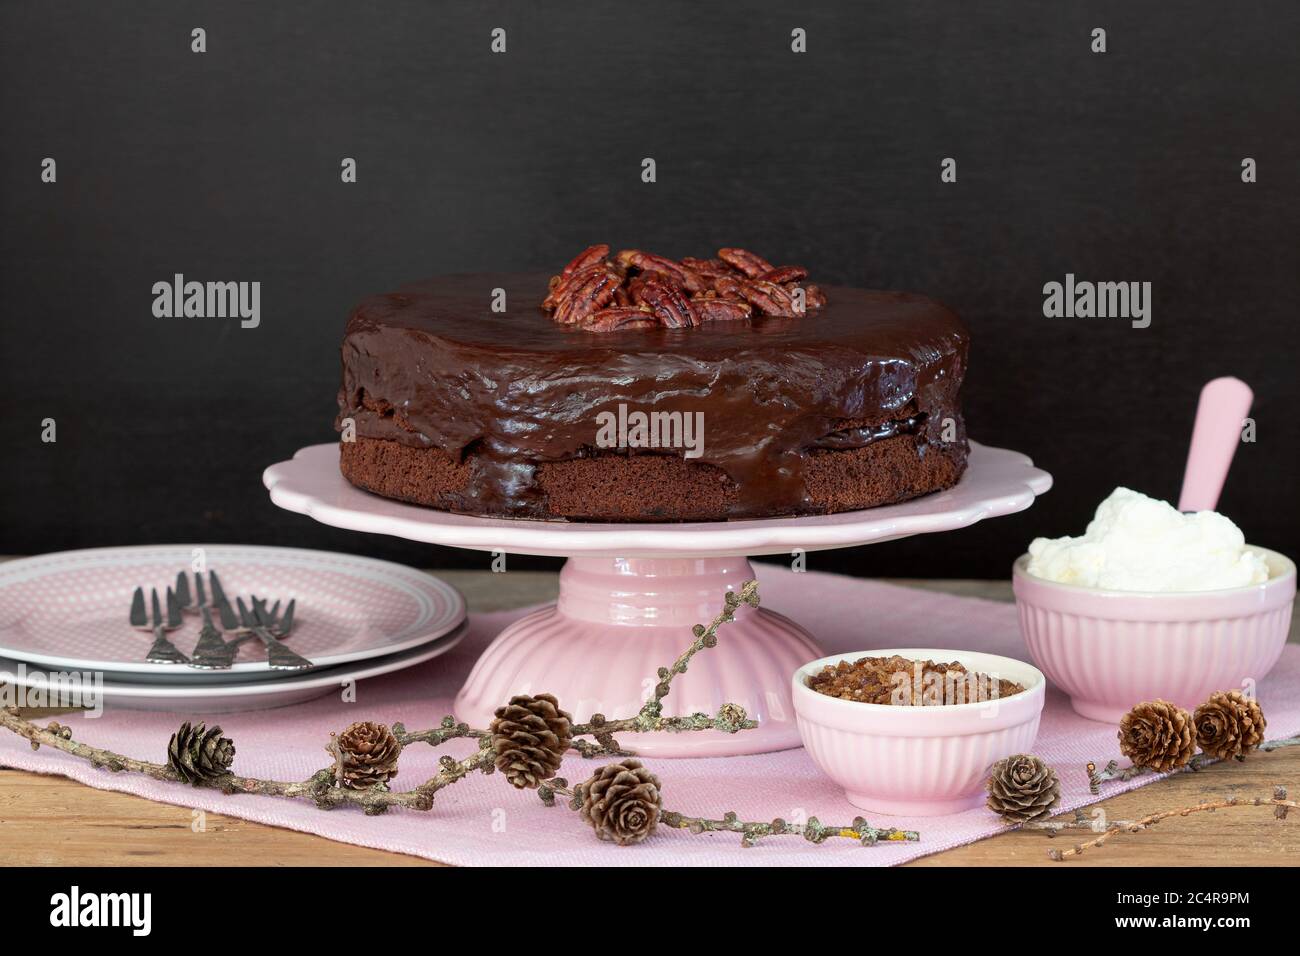 chocolate cake with pecan nuts on cake plate Stock Photo